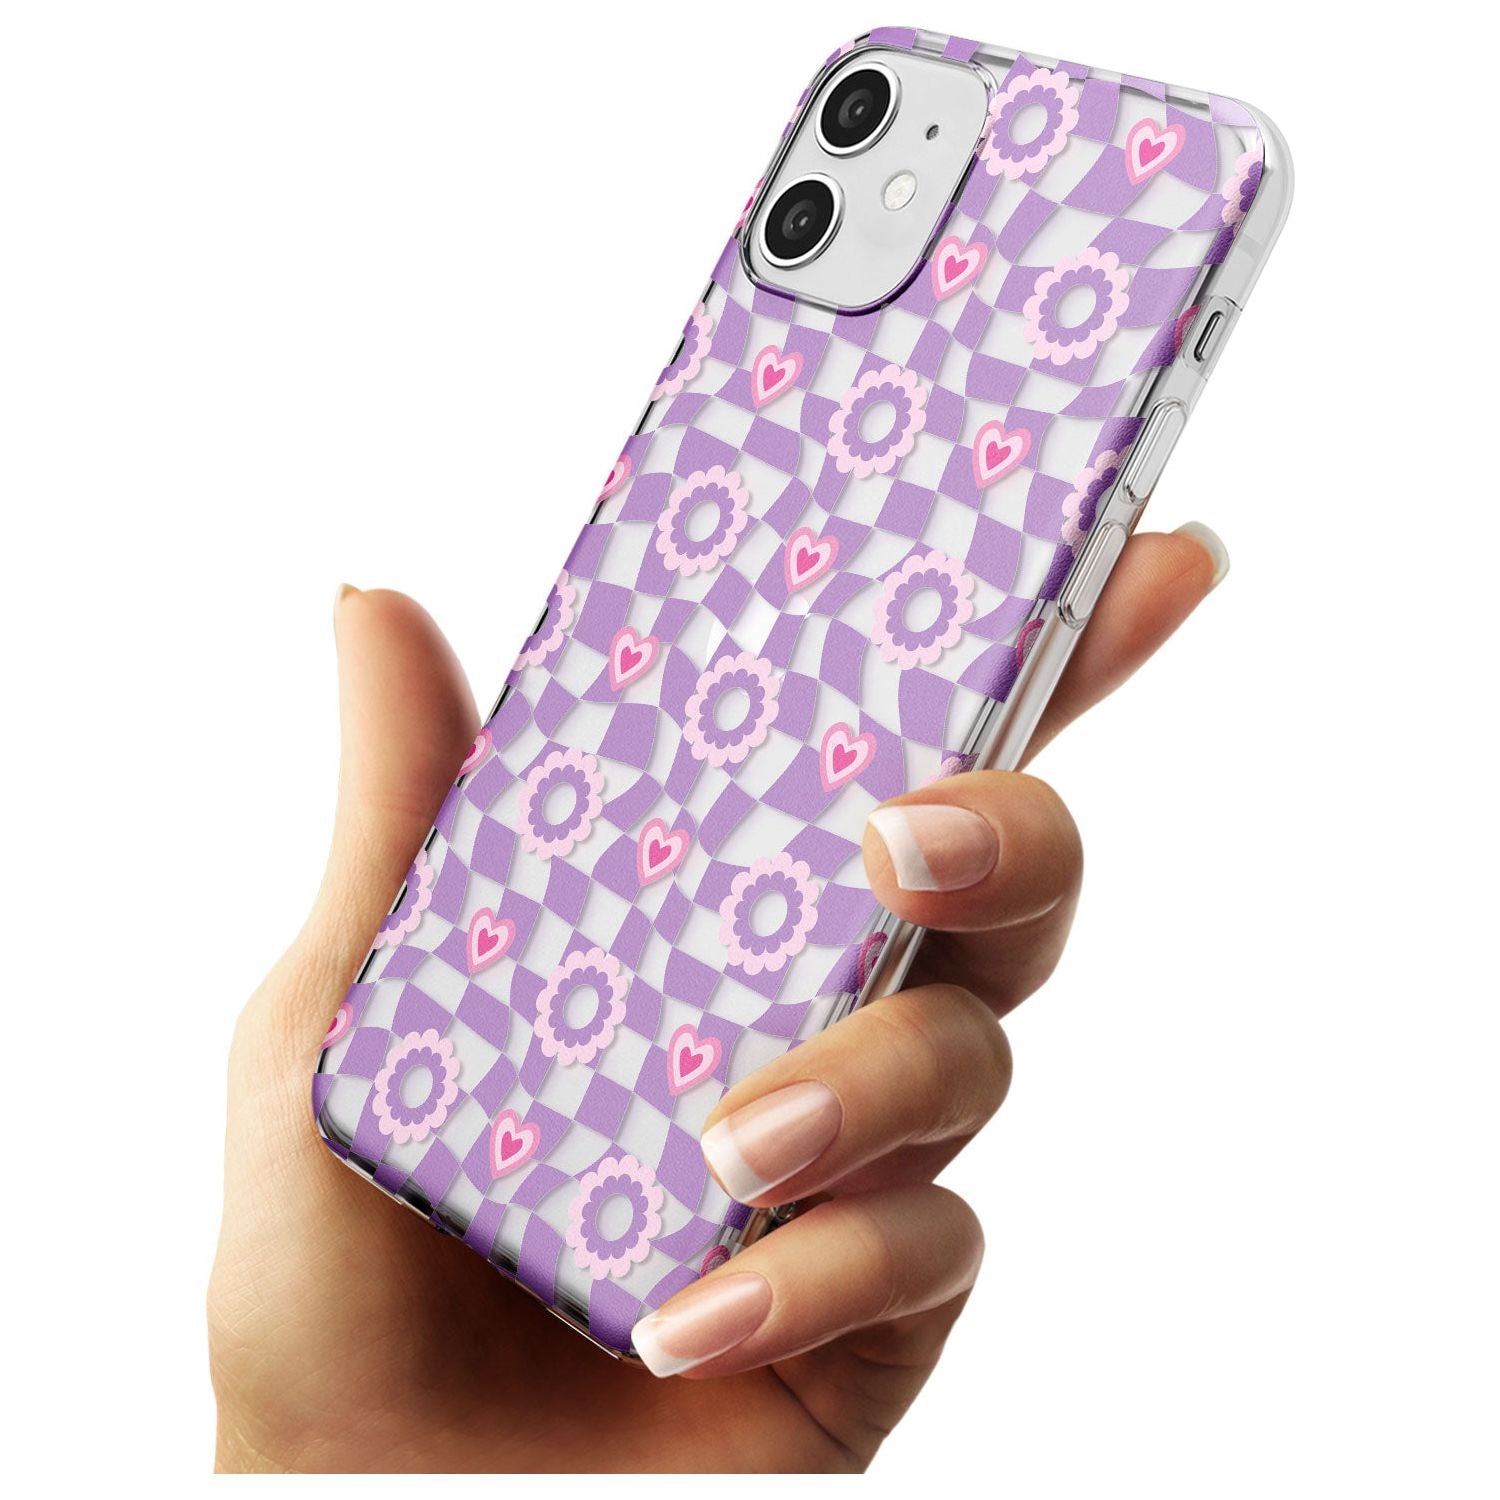 Checkered Love Pattern Slim TPU Phone Case for iPhone 11